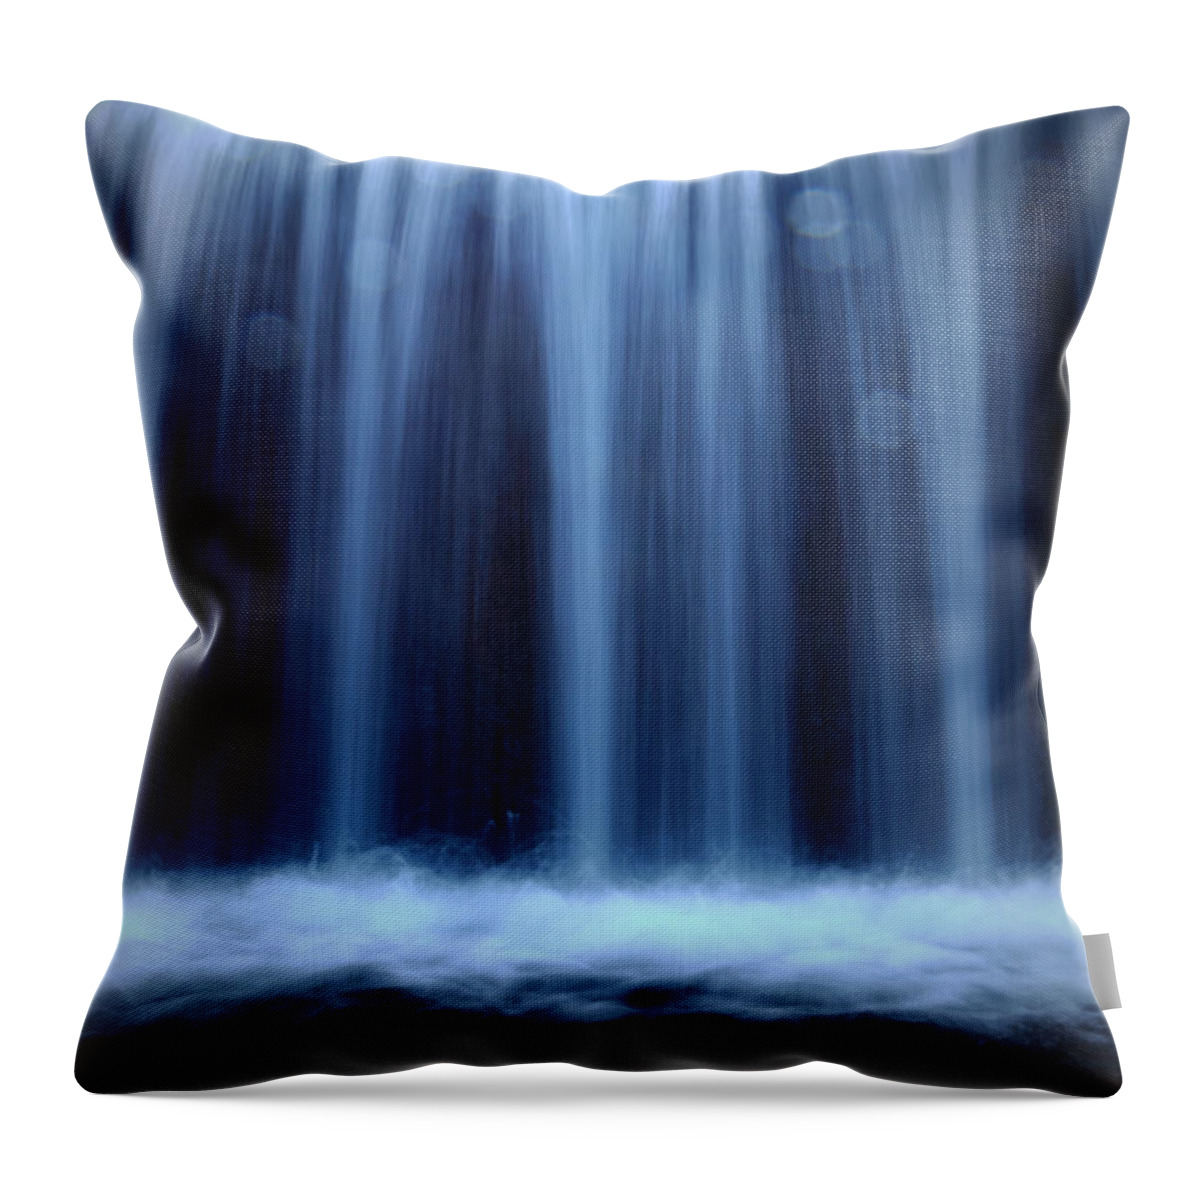 Waterfall Throw Pillow featuring the photograph Melting Memories by Mark Ross